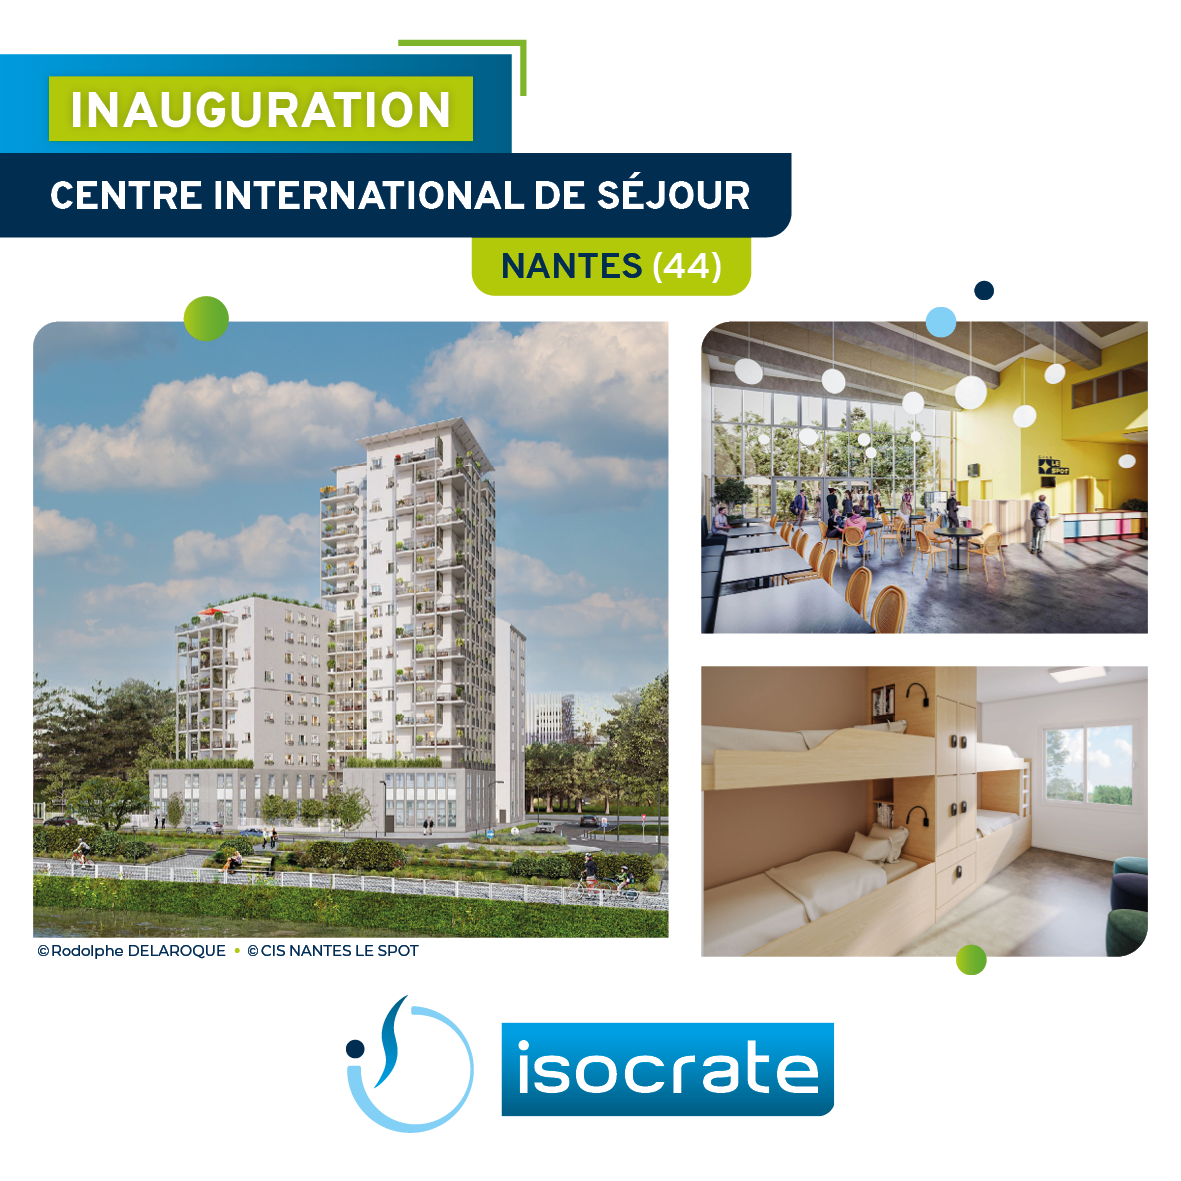 S2 FÉVRIER ISOCRATE INAUGURATION (1)